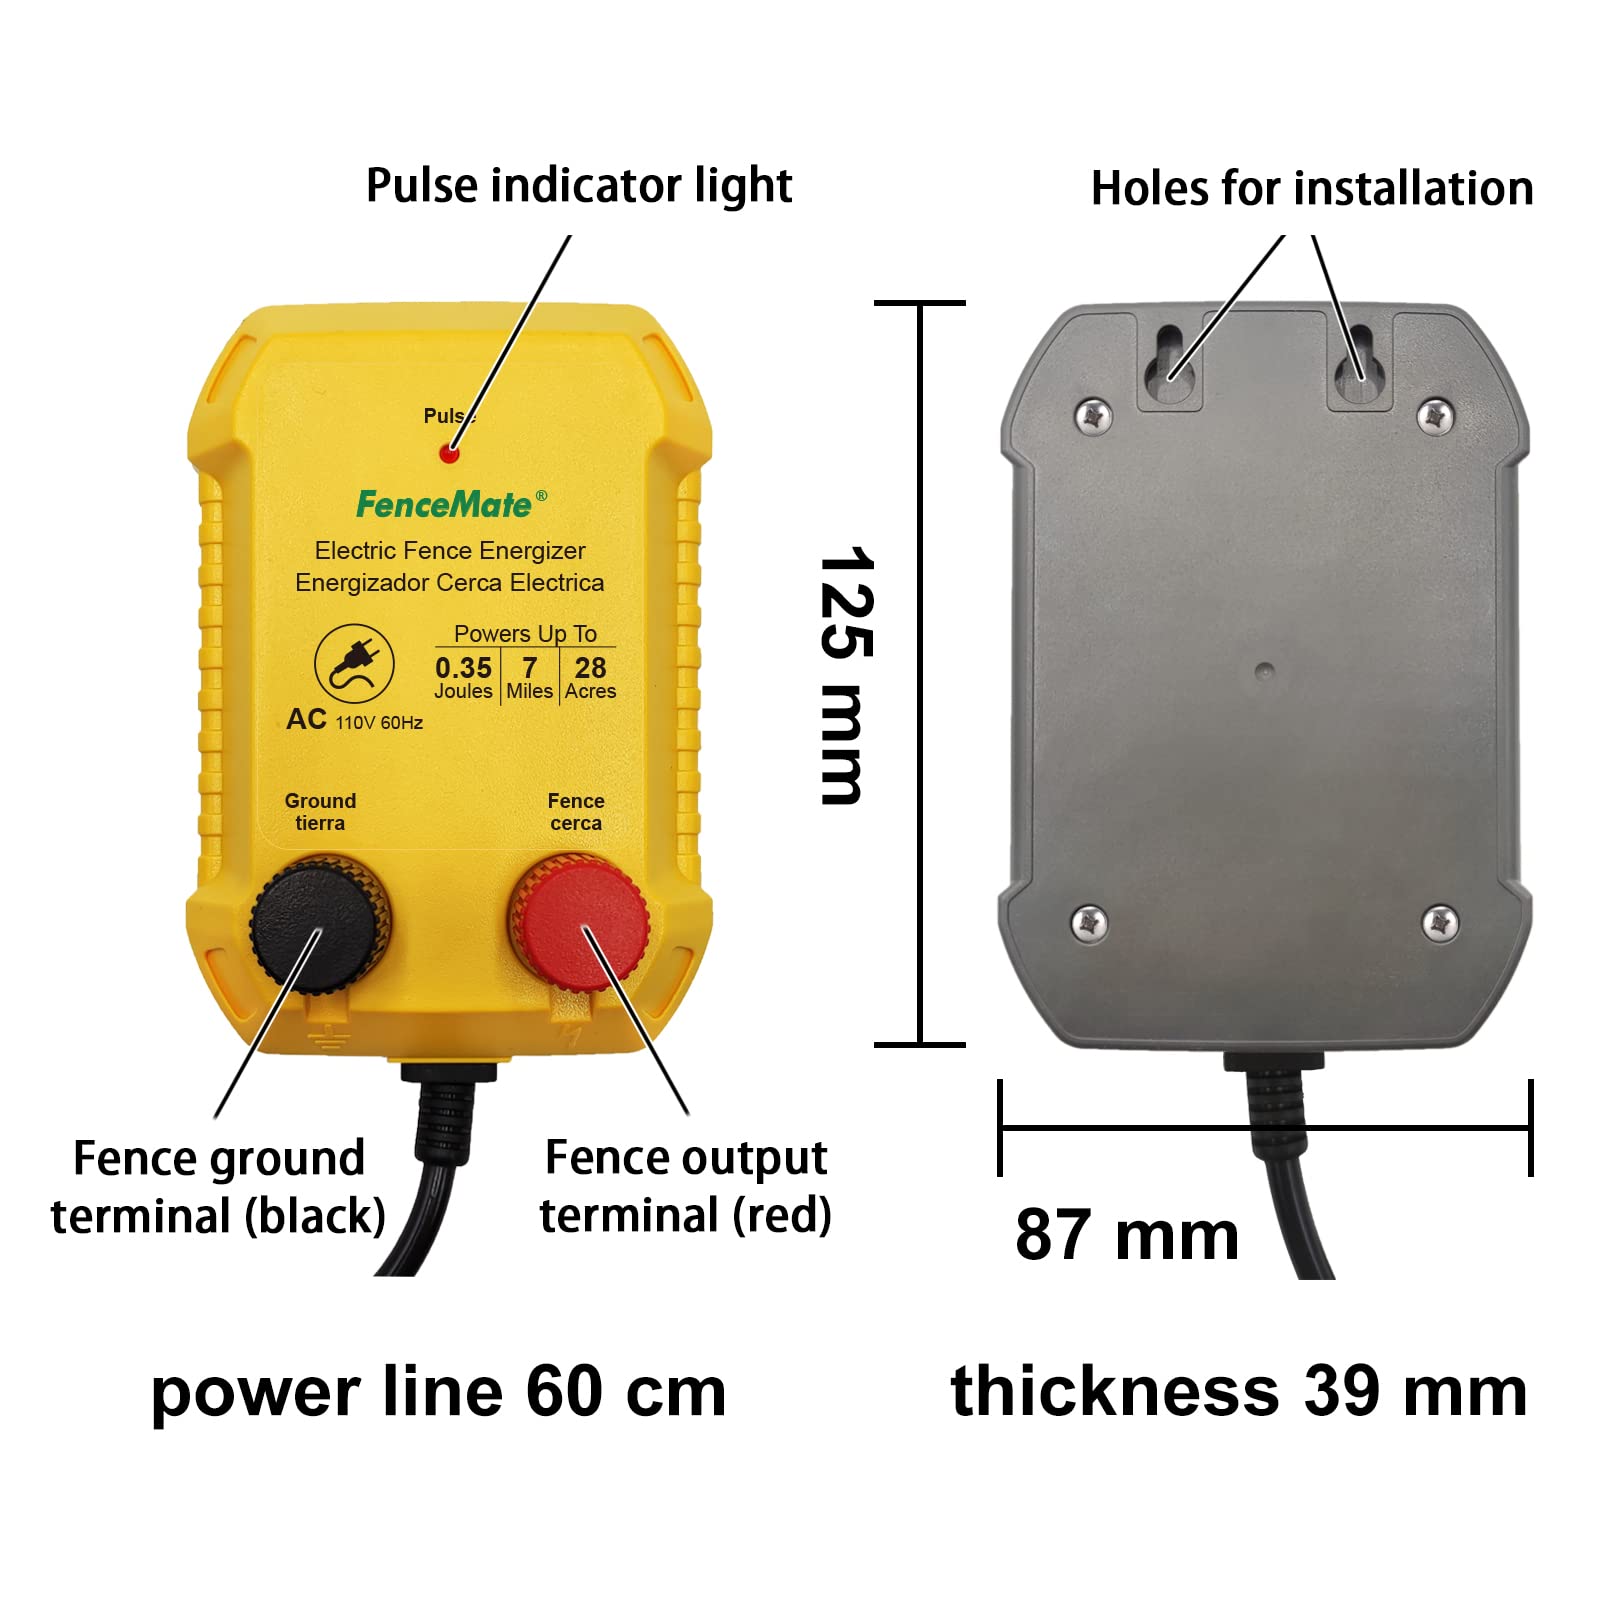 FenceMate AC Powered Electric Fence Charger Output 0.35J up to 7 Miles, Fence Energizer up to 7 kV to Contain Pet, Poultry, Keep Rodent & Nuisance Animals Out, Used in Homestead, Garden, Pond, Orchard